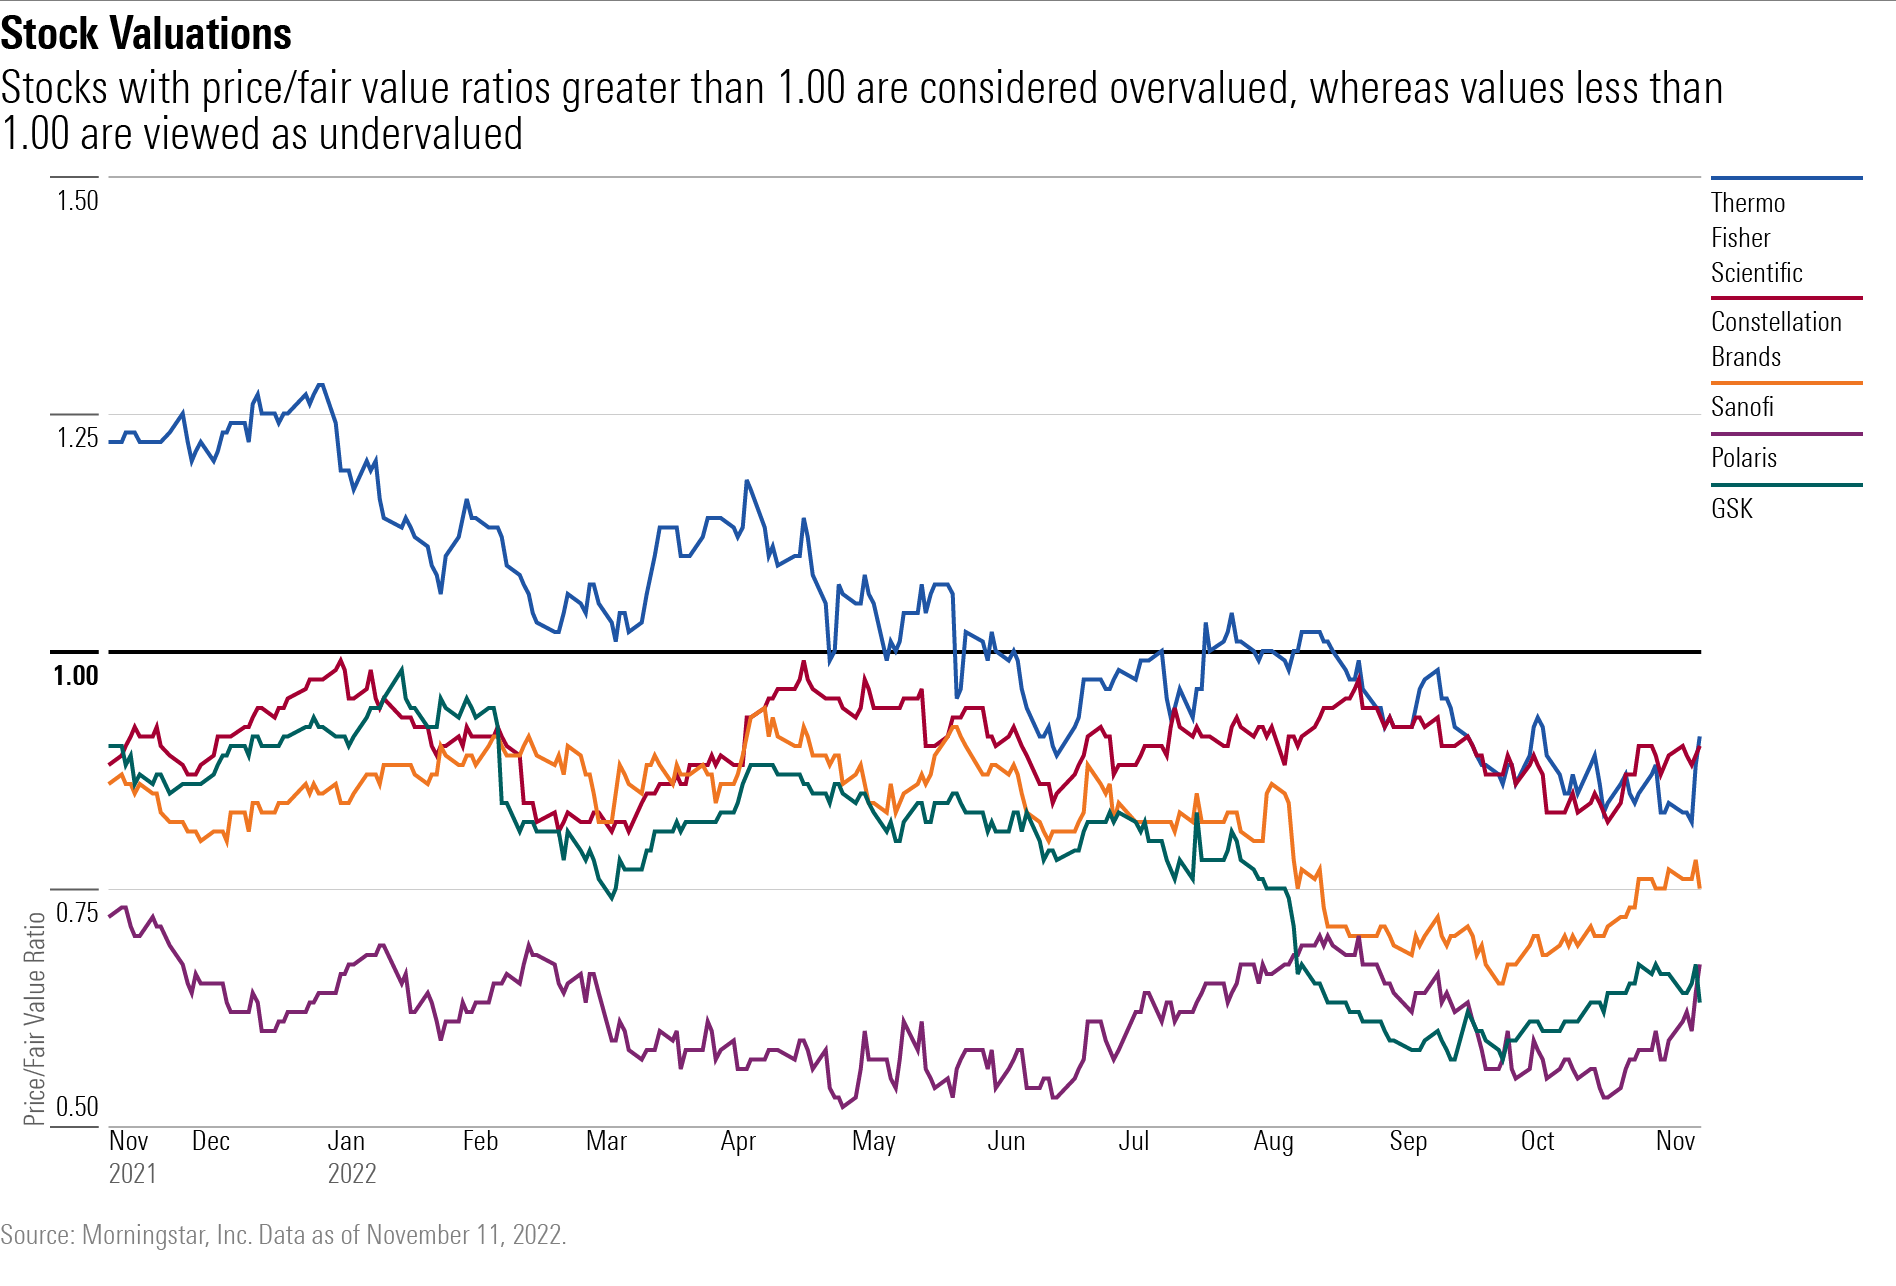 A line chart showing the historical price/fair value ratios of TMO, STZ, SNY, PII, and GSK stock.